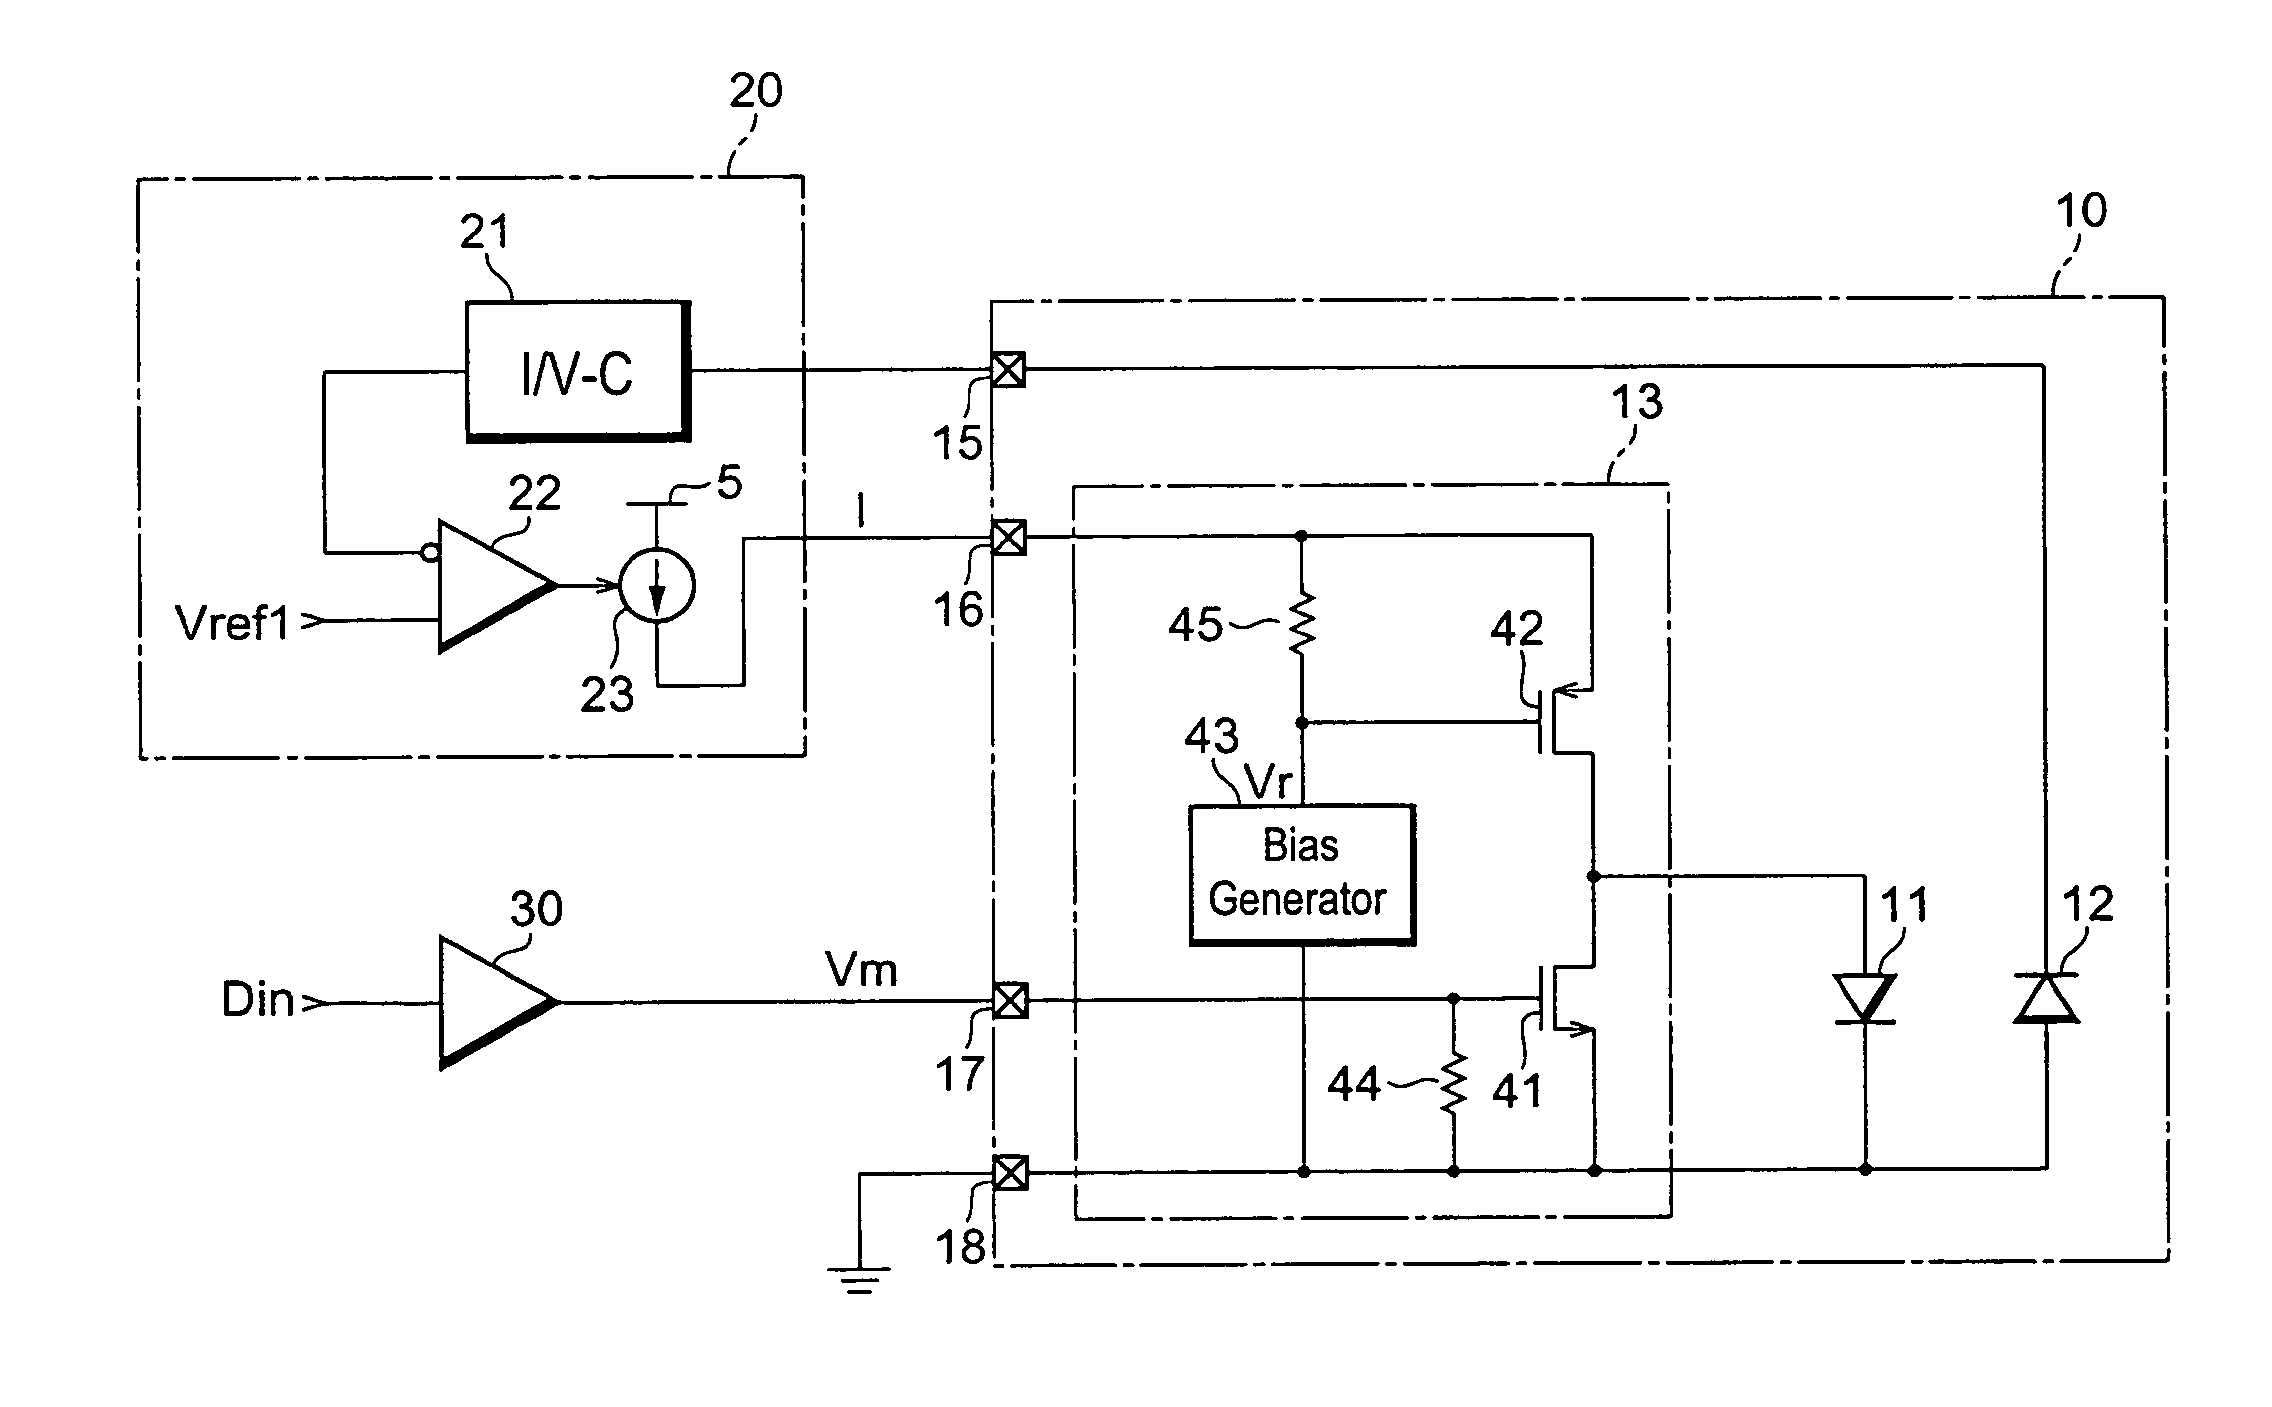 Optical transmitter with a shunt driving configuration and a load transistor operated in common gate mode